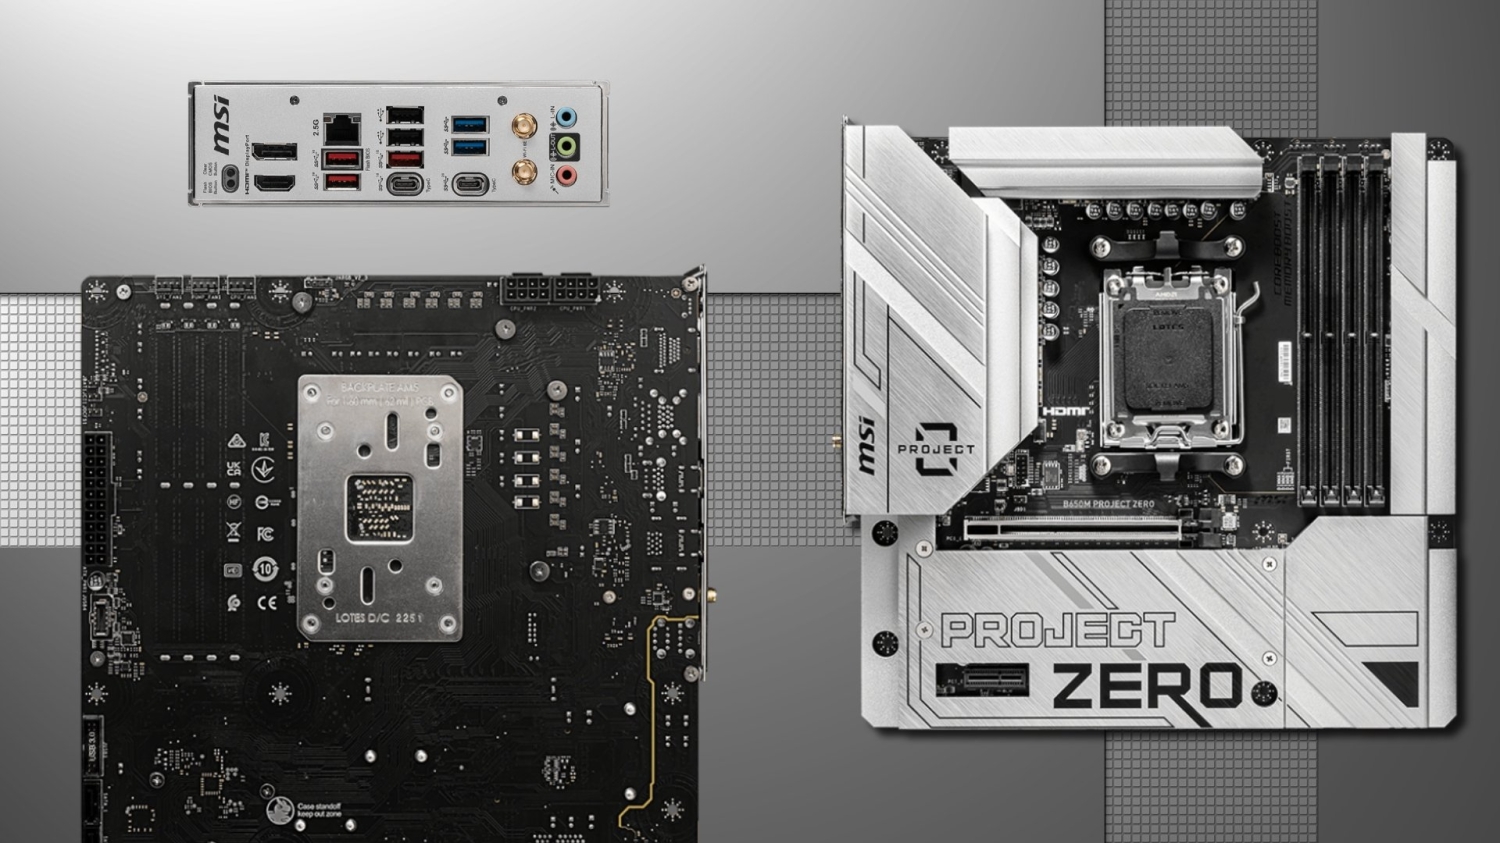 TweakTown Enlarged Image - The new B650M PROJECT ZERO motherboard for AMD AM5 from MSI, image credit: MSI.